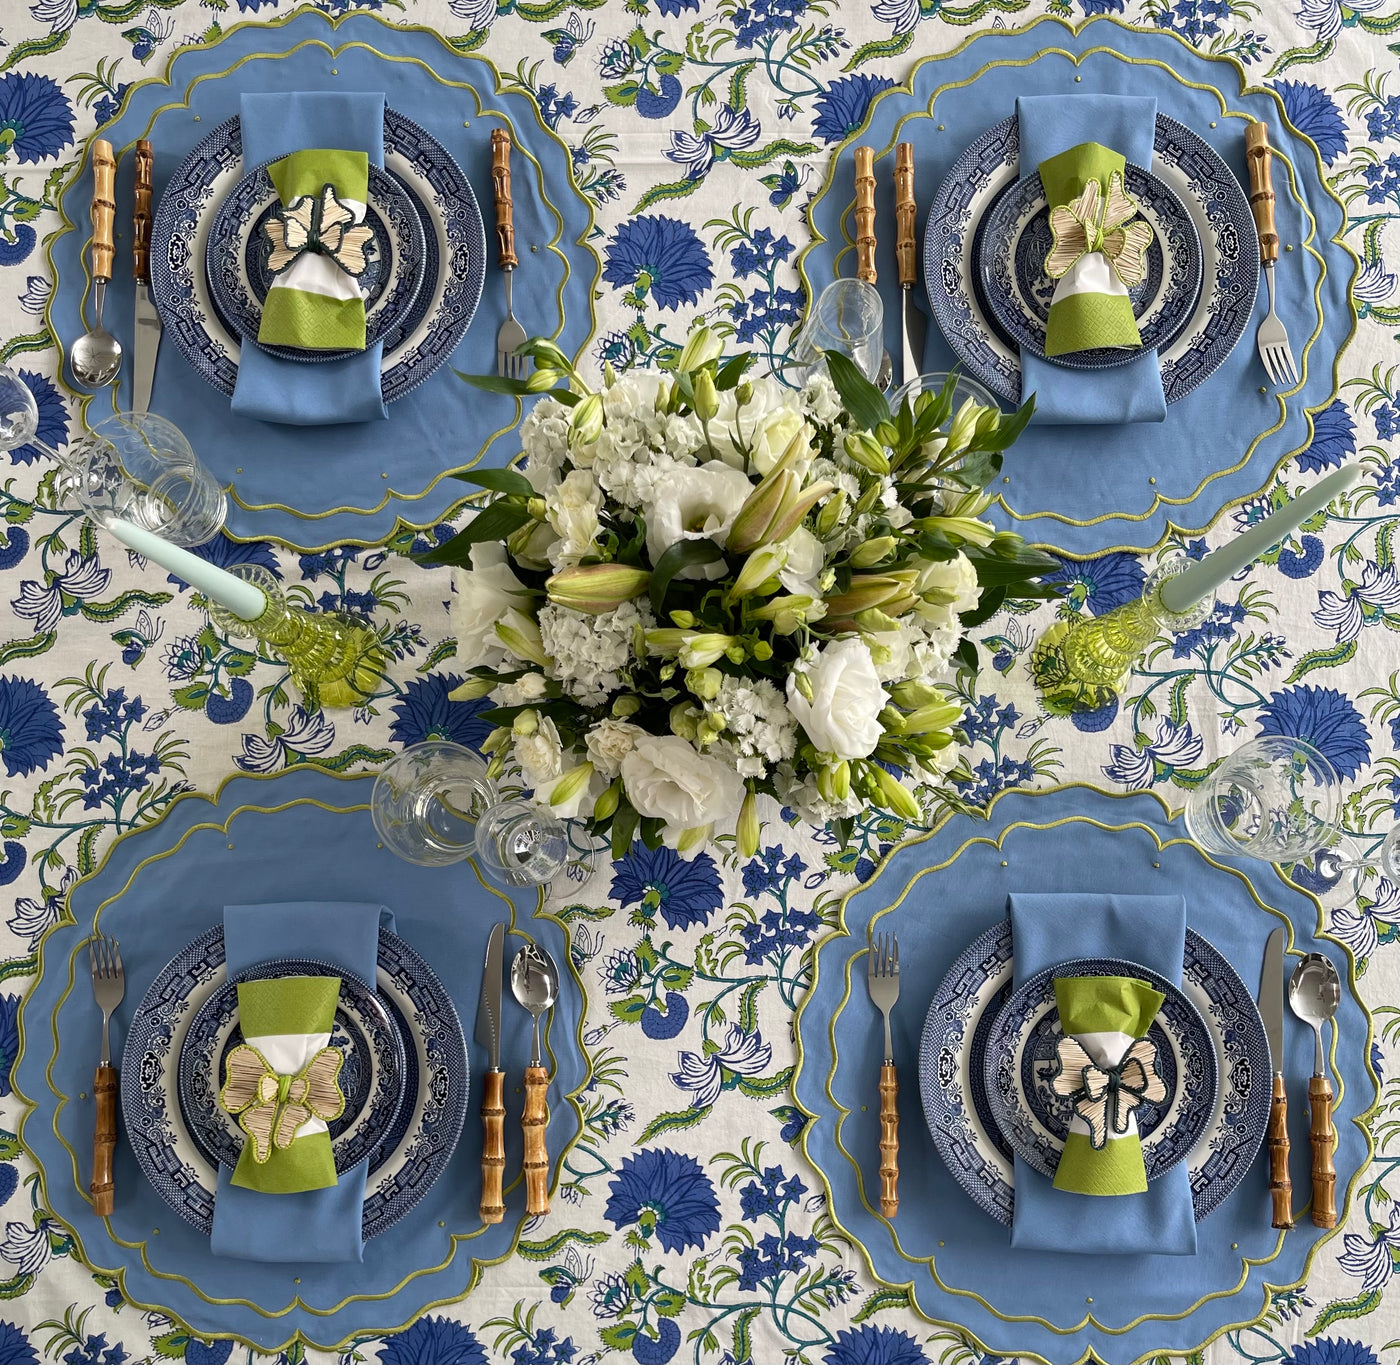 'High Tea' Placemat and Napkin Set - Blue and Chartreuse -Round